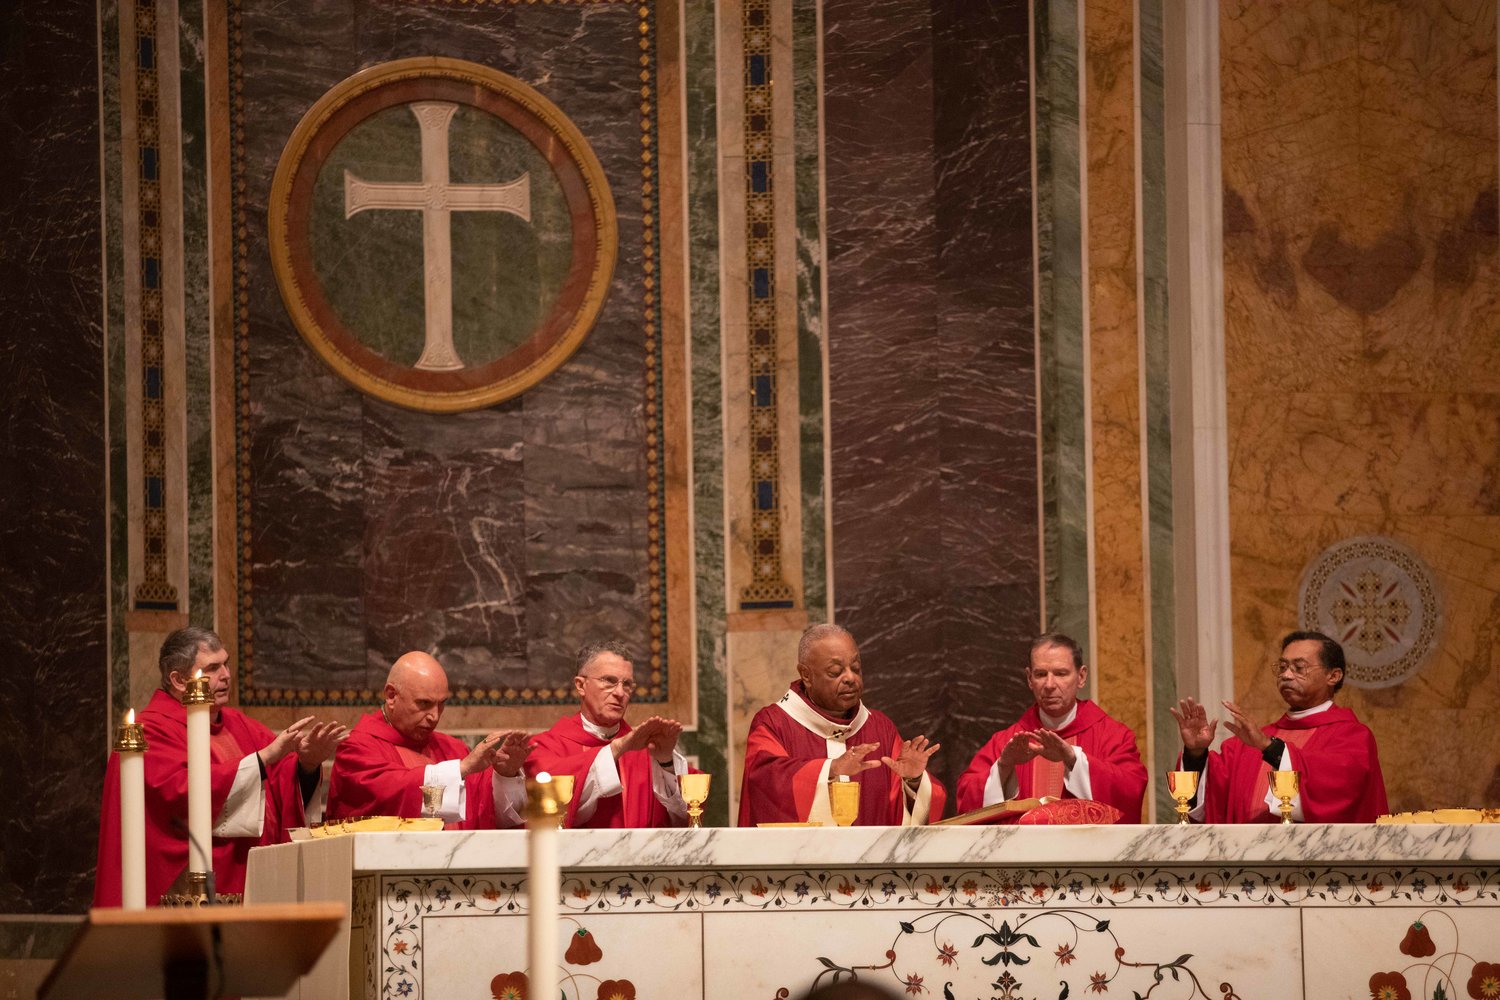 Washington Archbishop Wilton D. Gregory celebrates the annual Red Mass at St. Matthew’s Cathedral Oct. 6, 2019. Other concelebrants were Washington Auxiliary Bishops Michael Fisher and Mario Dorsonville, and Archbishop Timothy P. Broglio of the U.S. Archdiocese for the Military Services, Bishop Michael F. Burbidge of Arlington, Va., and Washington Auxiliary Bishop Roy E. Campbell.